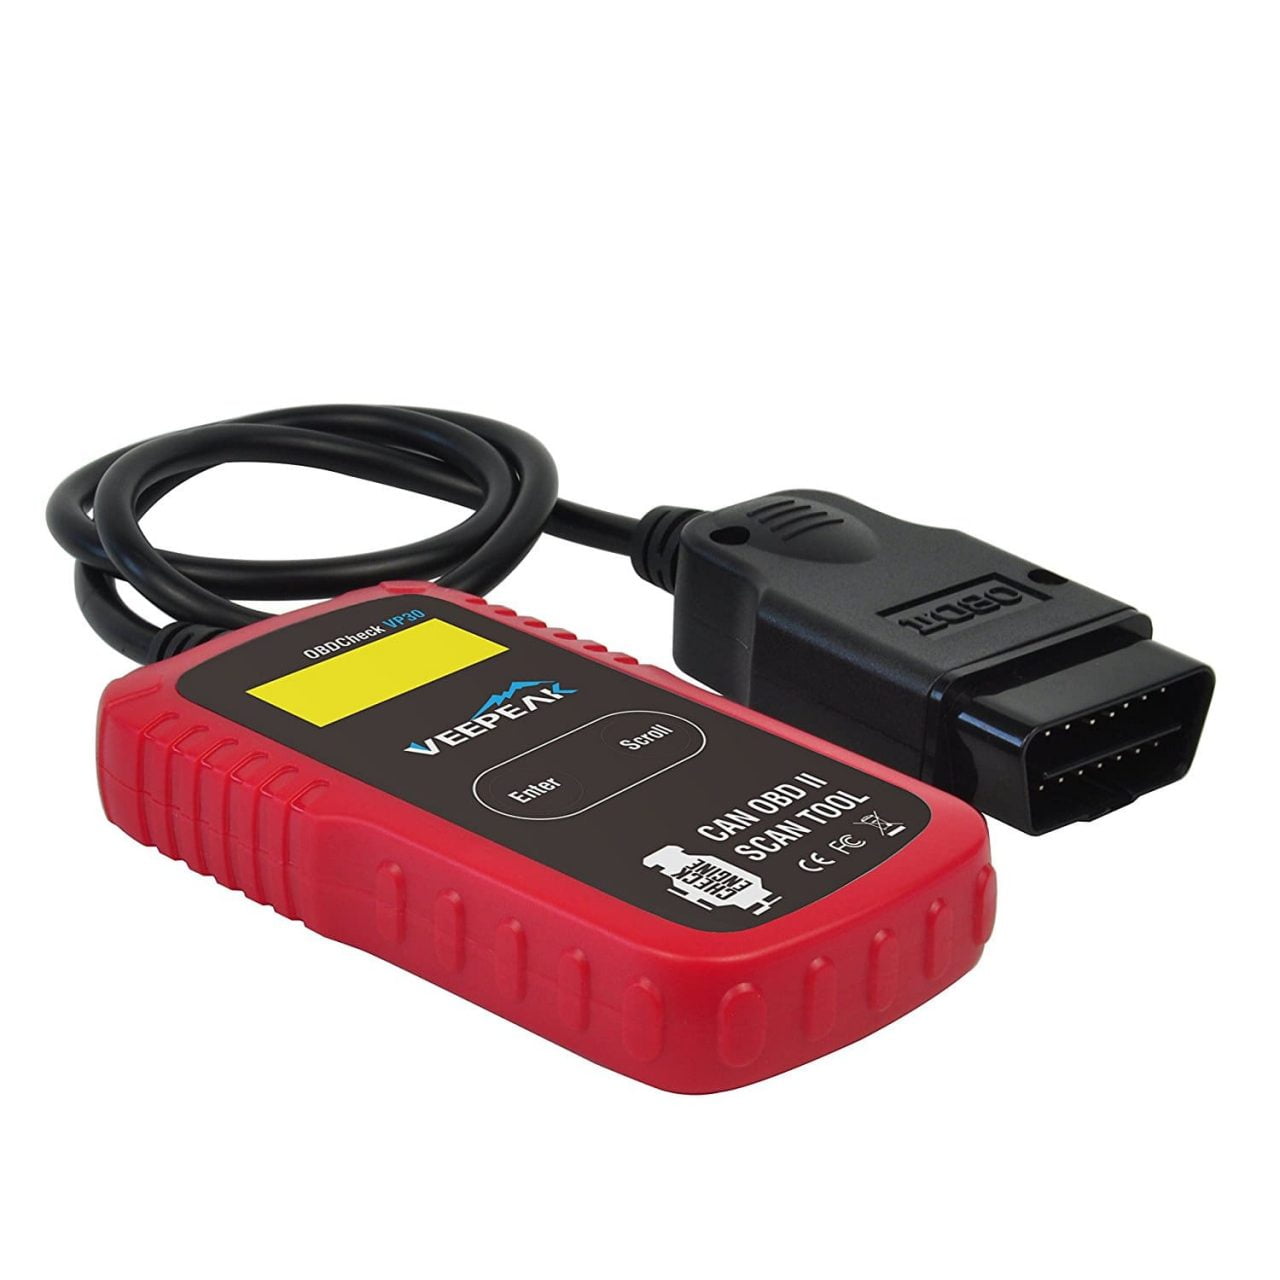 If you are a beginner and looking for a cheap Veepeak obd2 scanner then VP30 will be a good choice as it is quite easy to use.